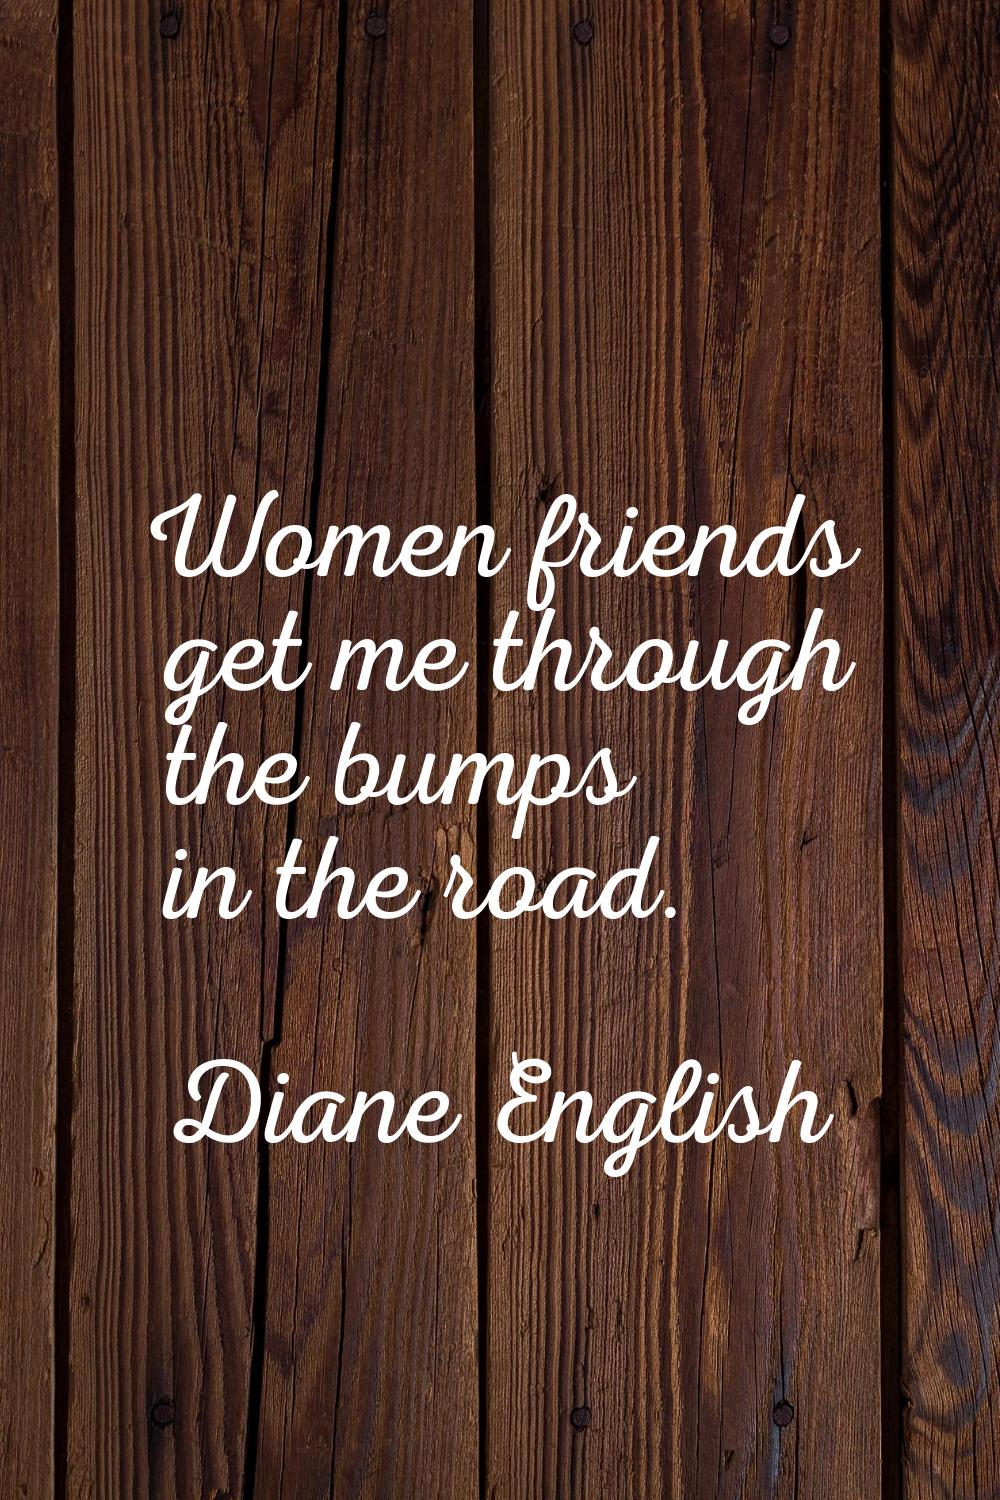 Women friends get me through the bumps in the road.